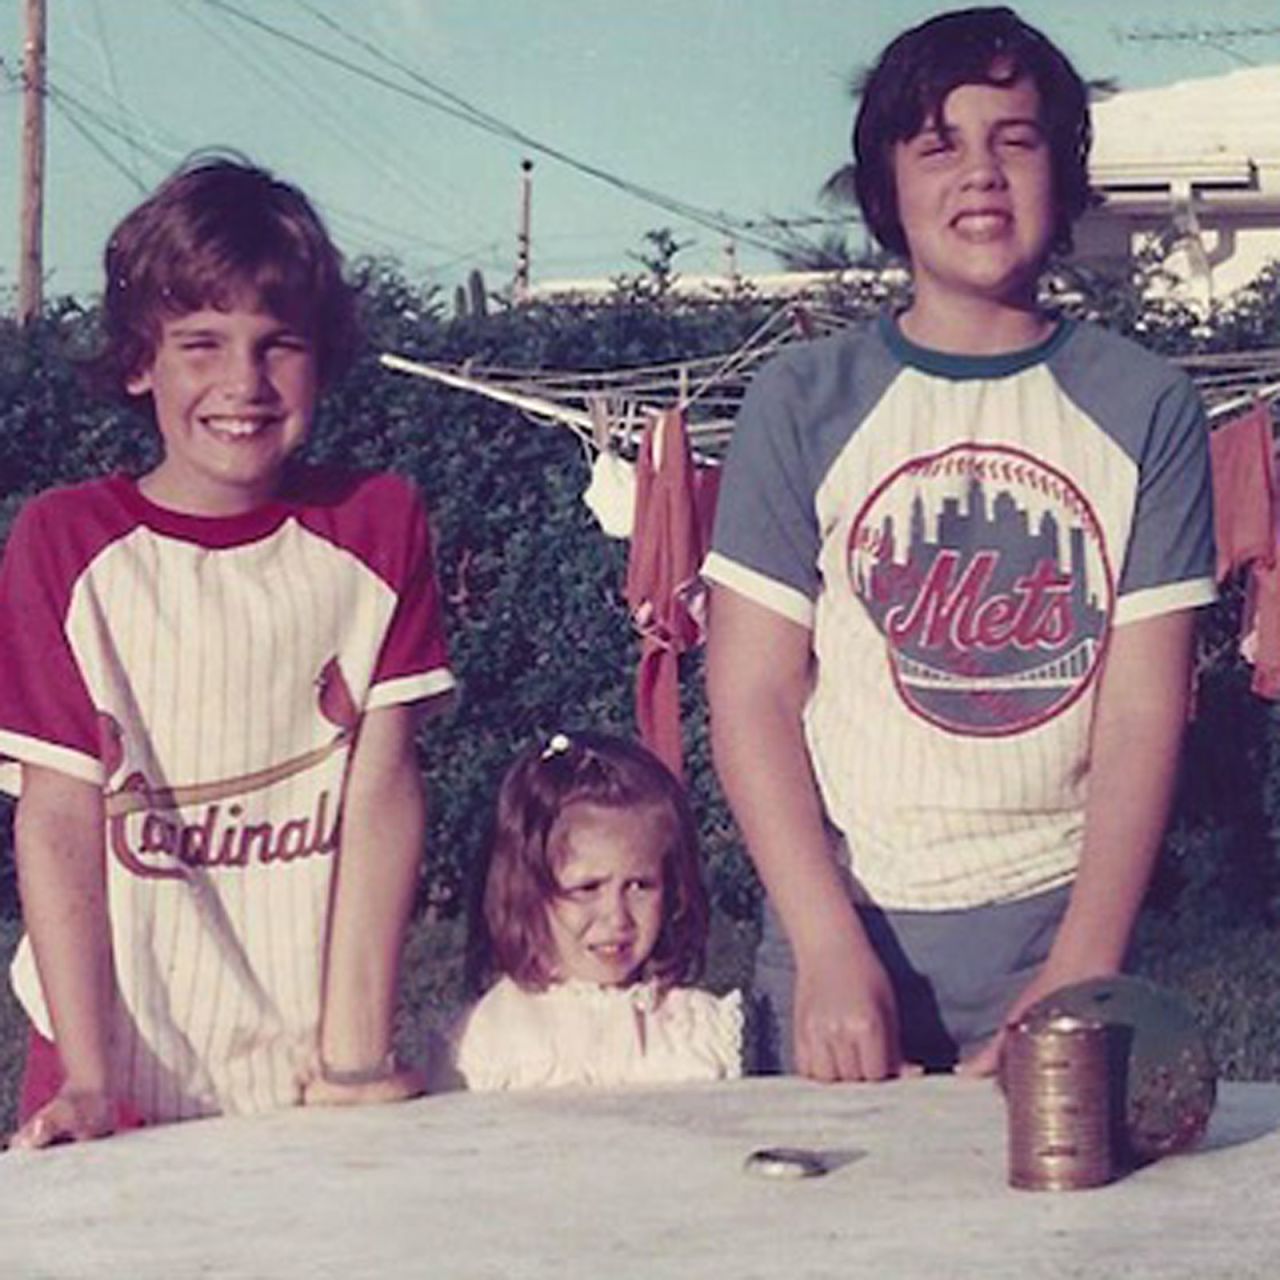 Christie, right, stands with his brother, Todd, in this old photo <a href="https://www.instagram.com/p/8wgsQjzetr/" target="_blank" target="_blank">he posted to Instagram</a> in 2015. Christie was born in Newark, New Jersey, in 1962. His family later moved to Livingston, New Jersey, where he attended high school before enrolling at the University of Delaware.